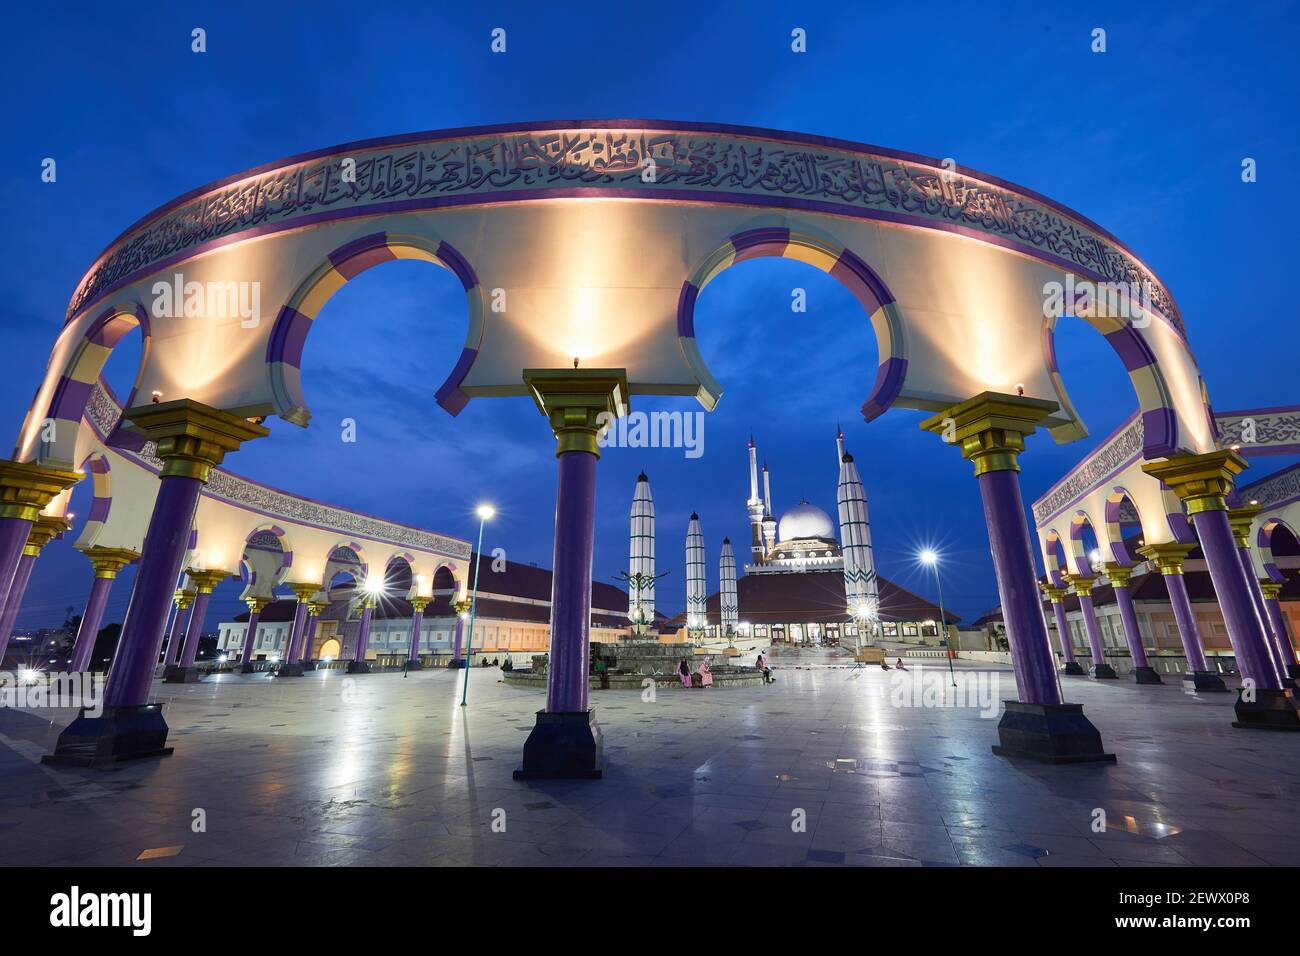 Arabic-style arches at the Grand Mosque of Central Java, Semarang, Java, Indonesia  The arches are supported by 25 pillars, each one representing one Stock Photo